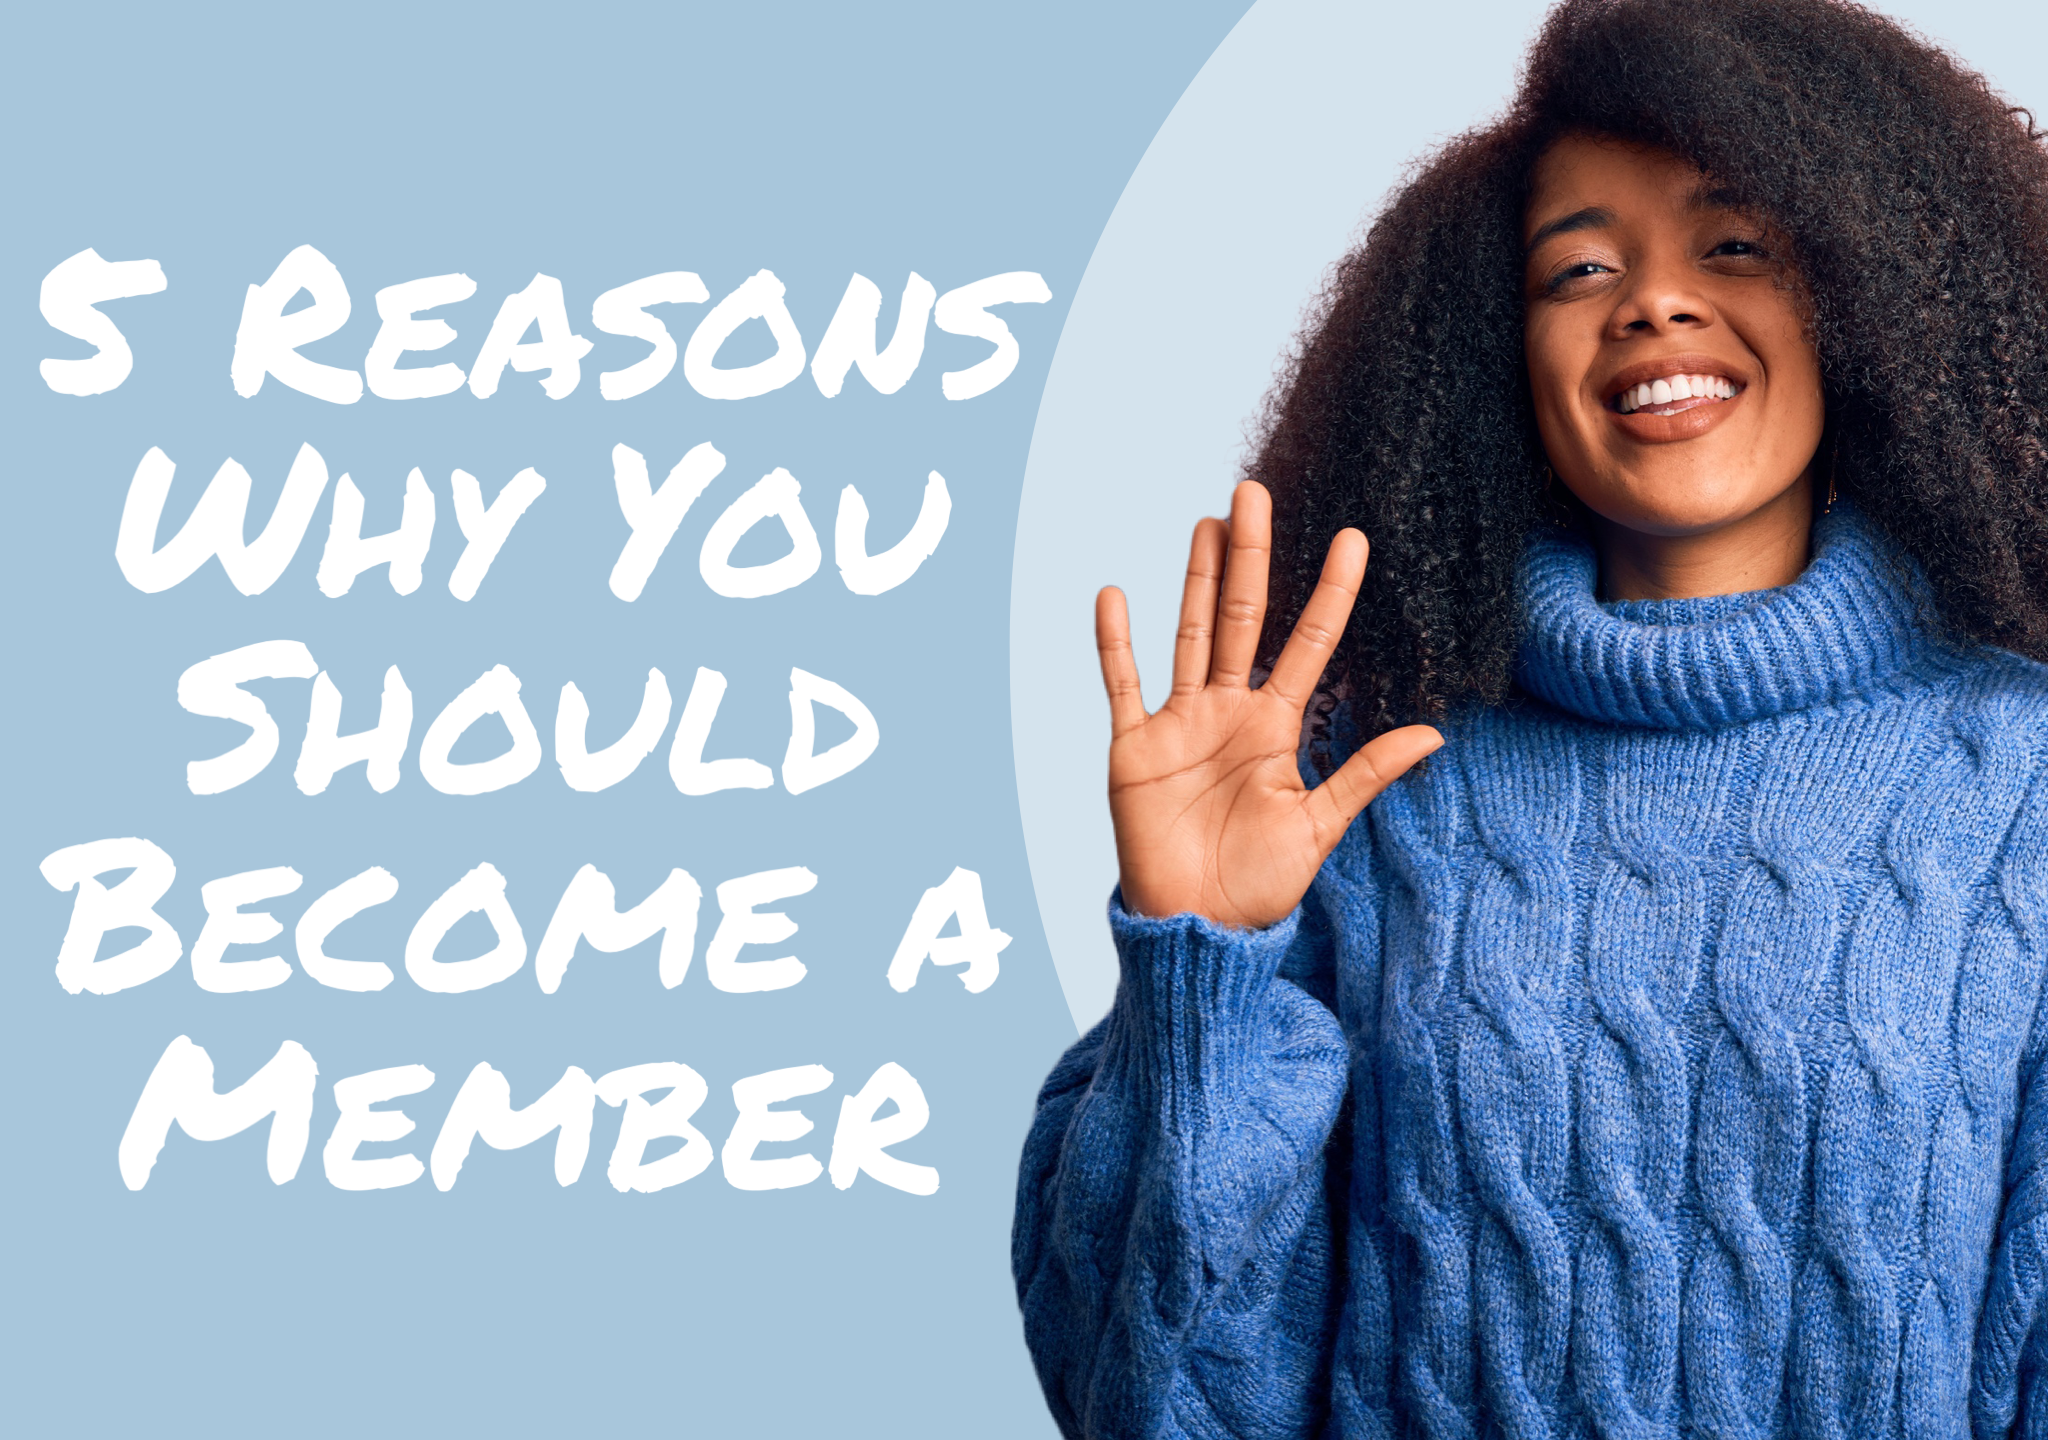 5 Reasons Why You Should Become a Member